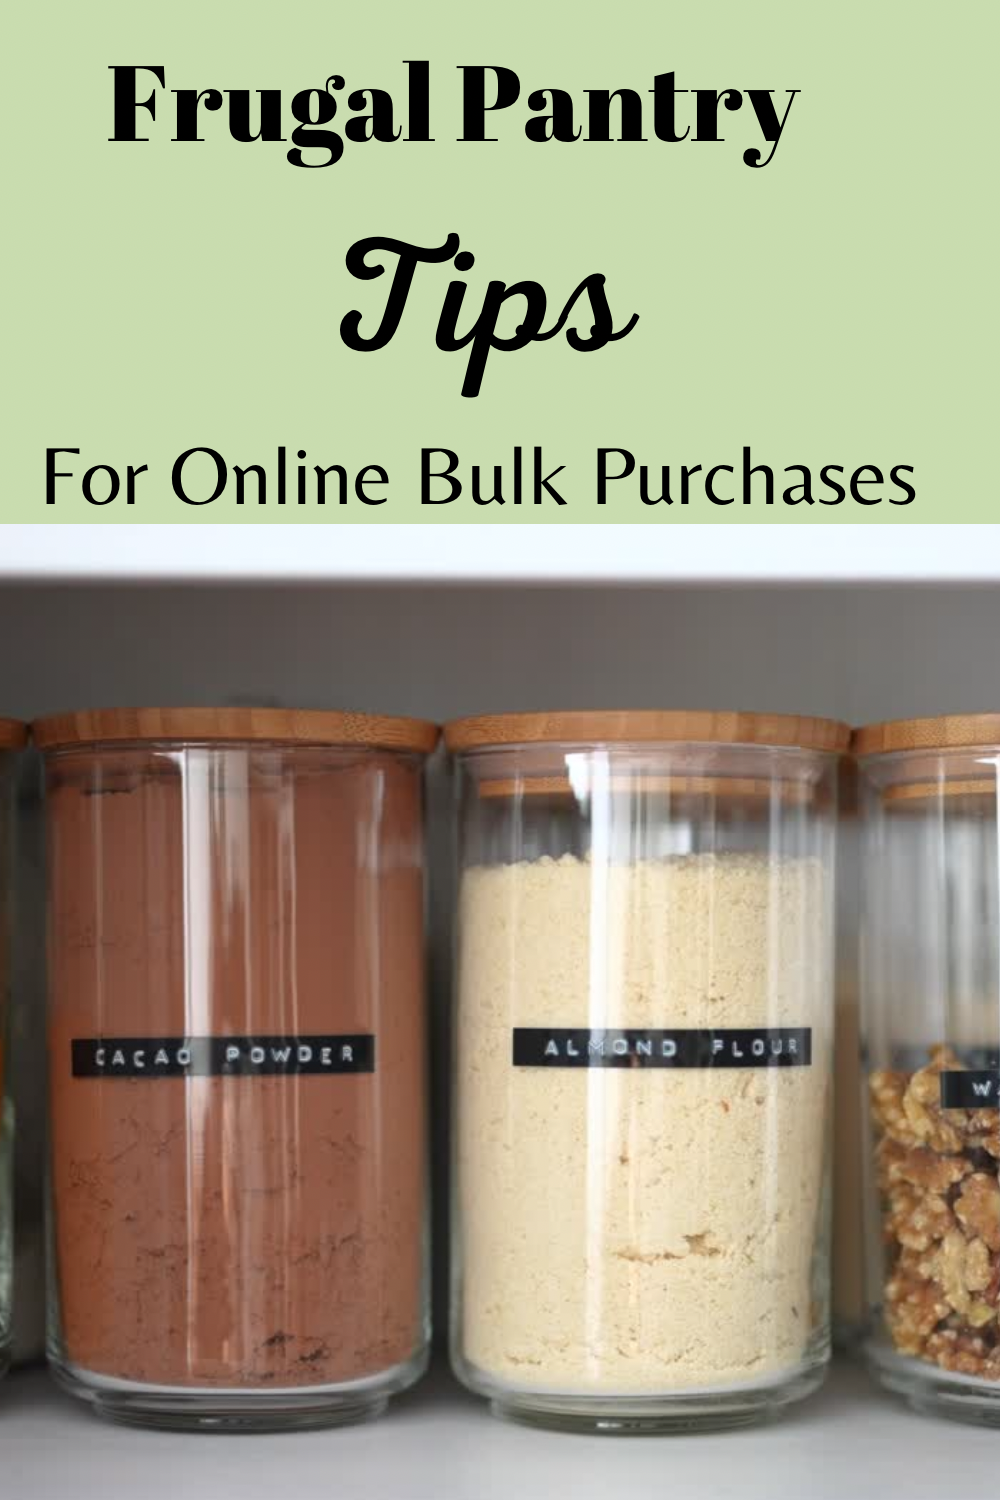 Frugal Pantry Tips for Online Bulk Purchases